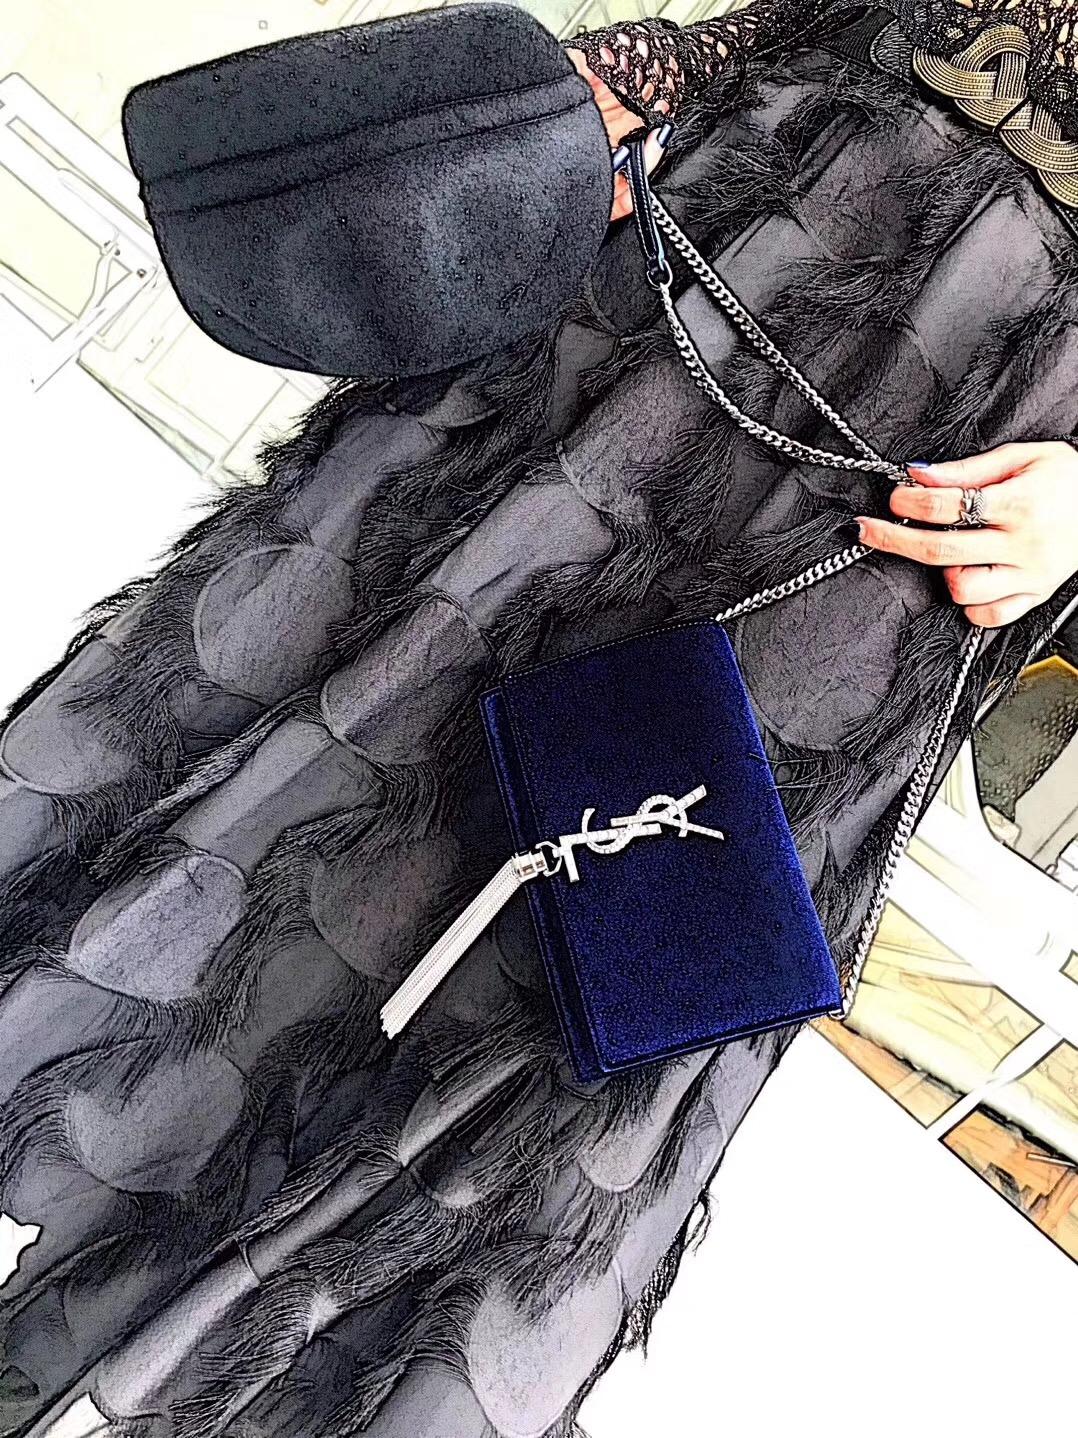 KATE chain and tassel wallet in Bordeaux velvet and crystals酒紅色